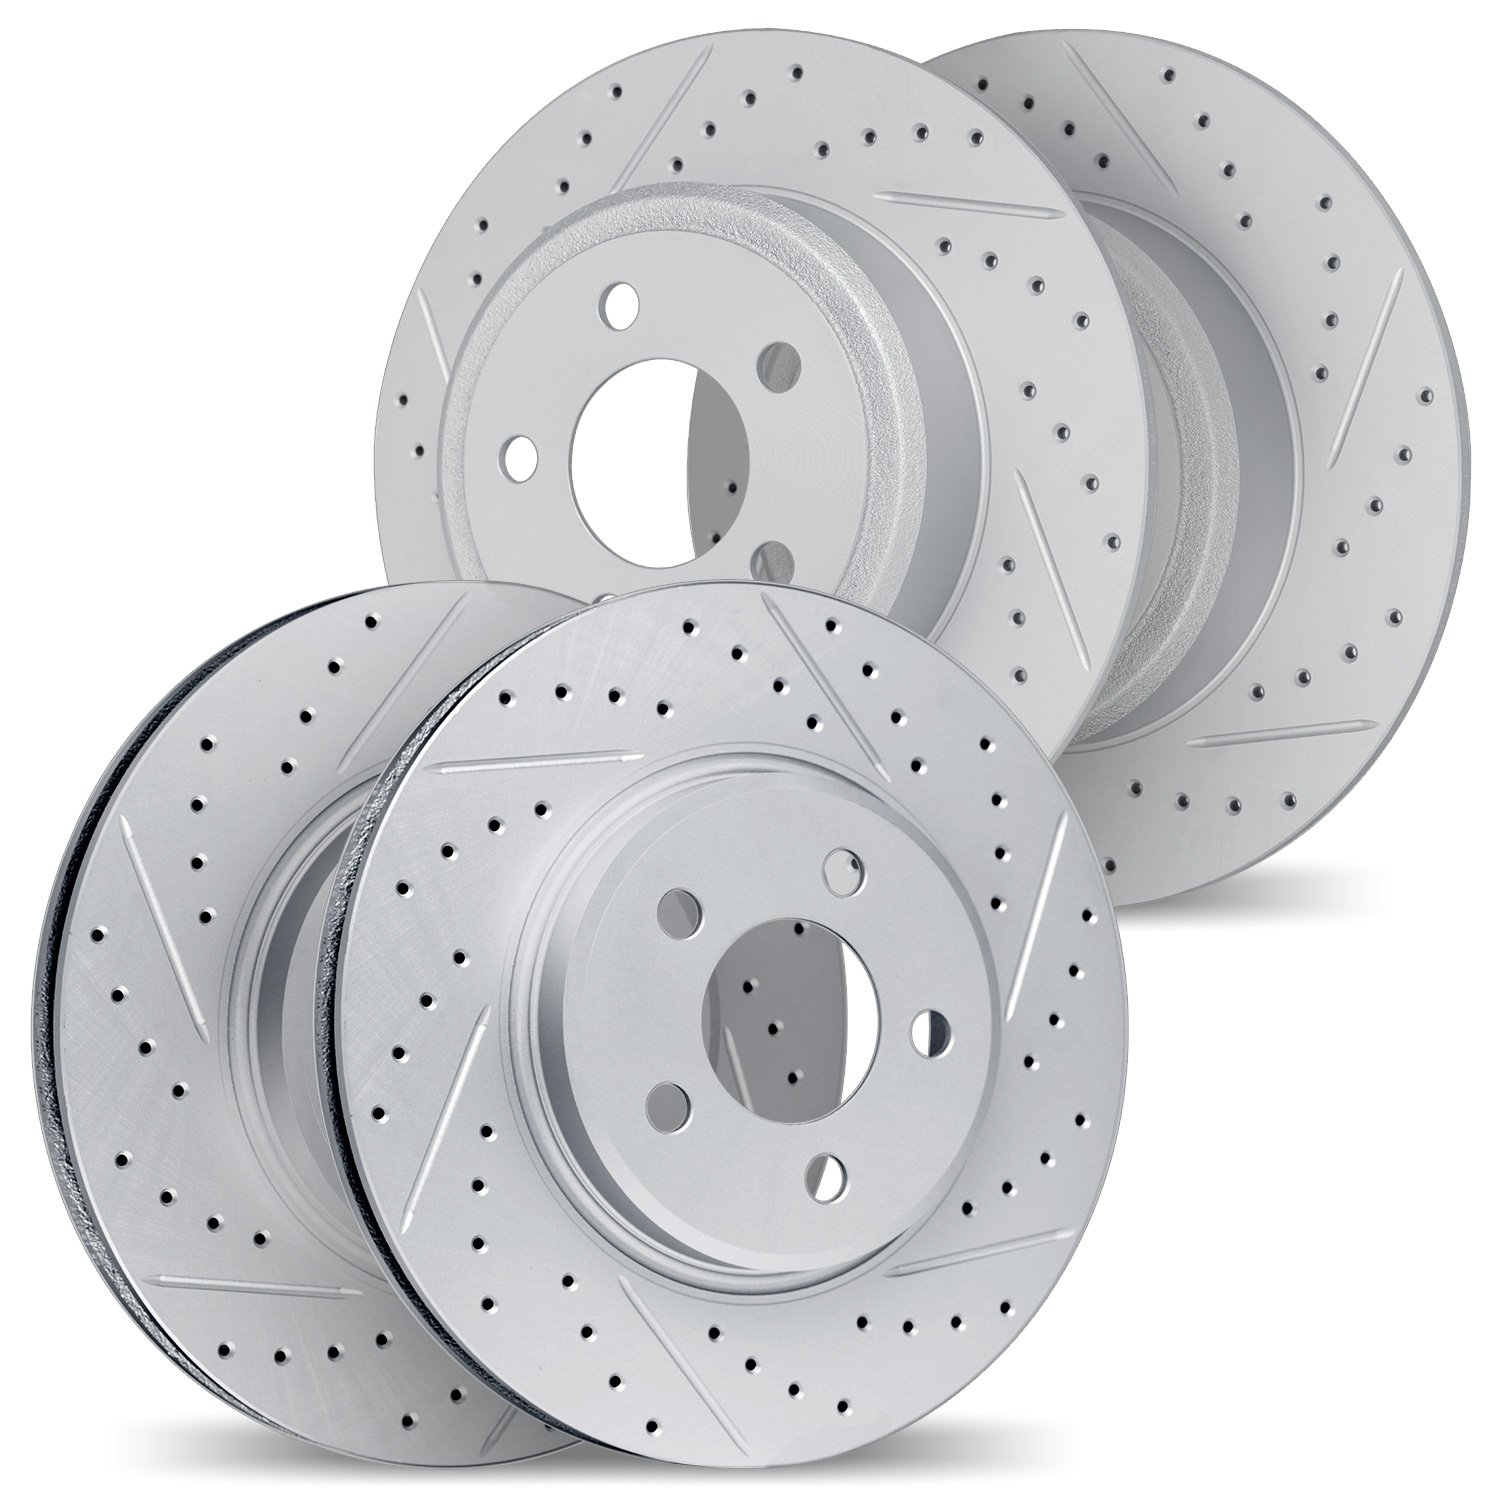 2004-58017 Geoperformance Drilled/Slotted Brake Rotors, Fits Select Acura/Honda, Position: Front and Rear